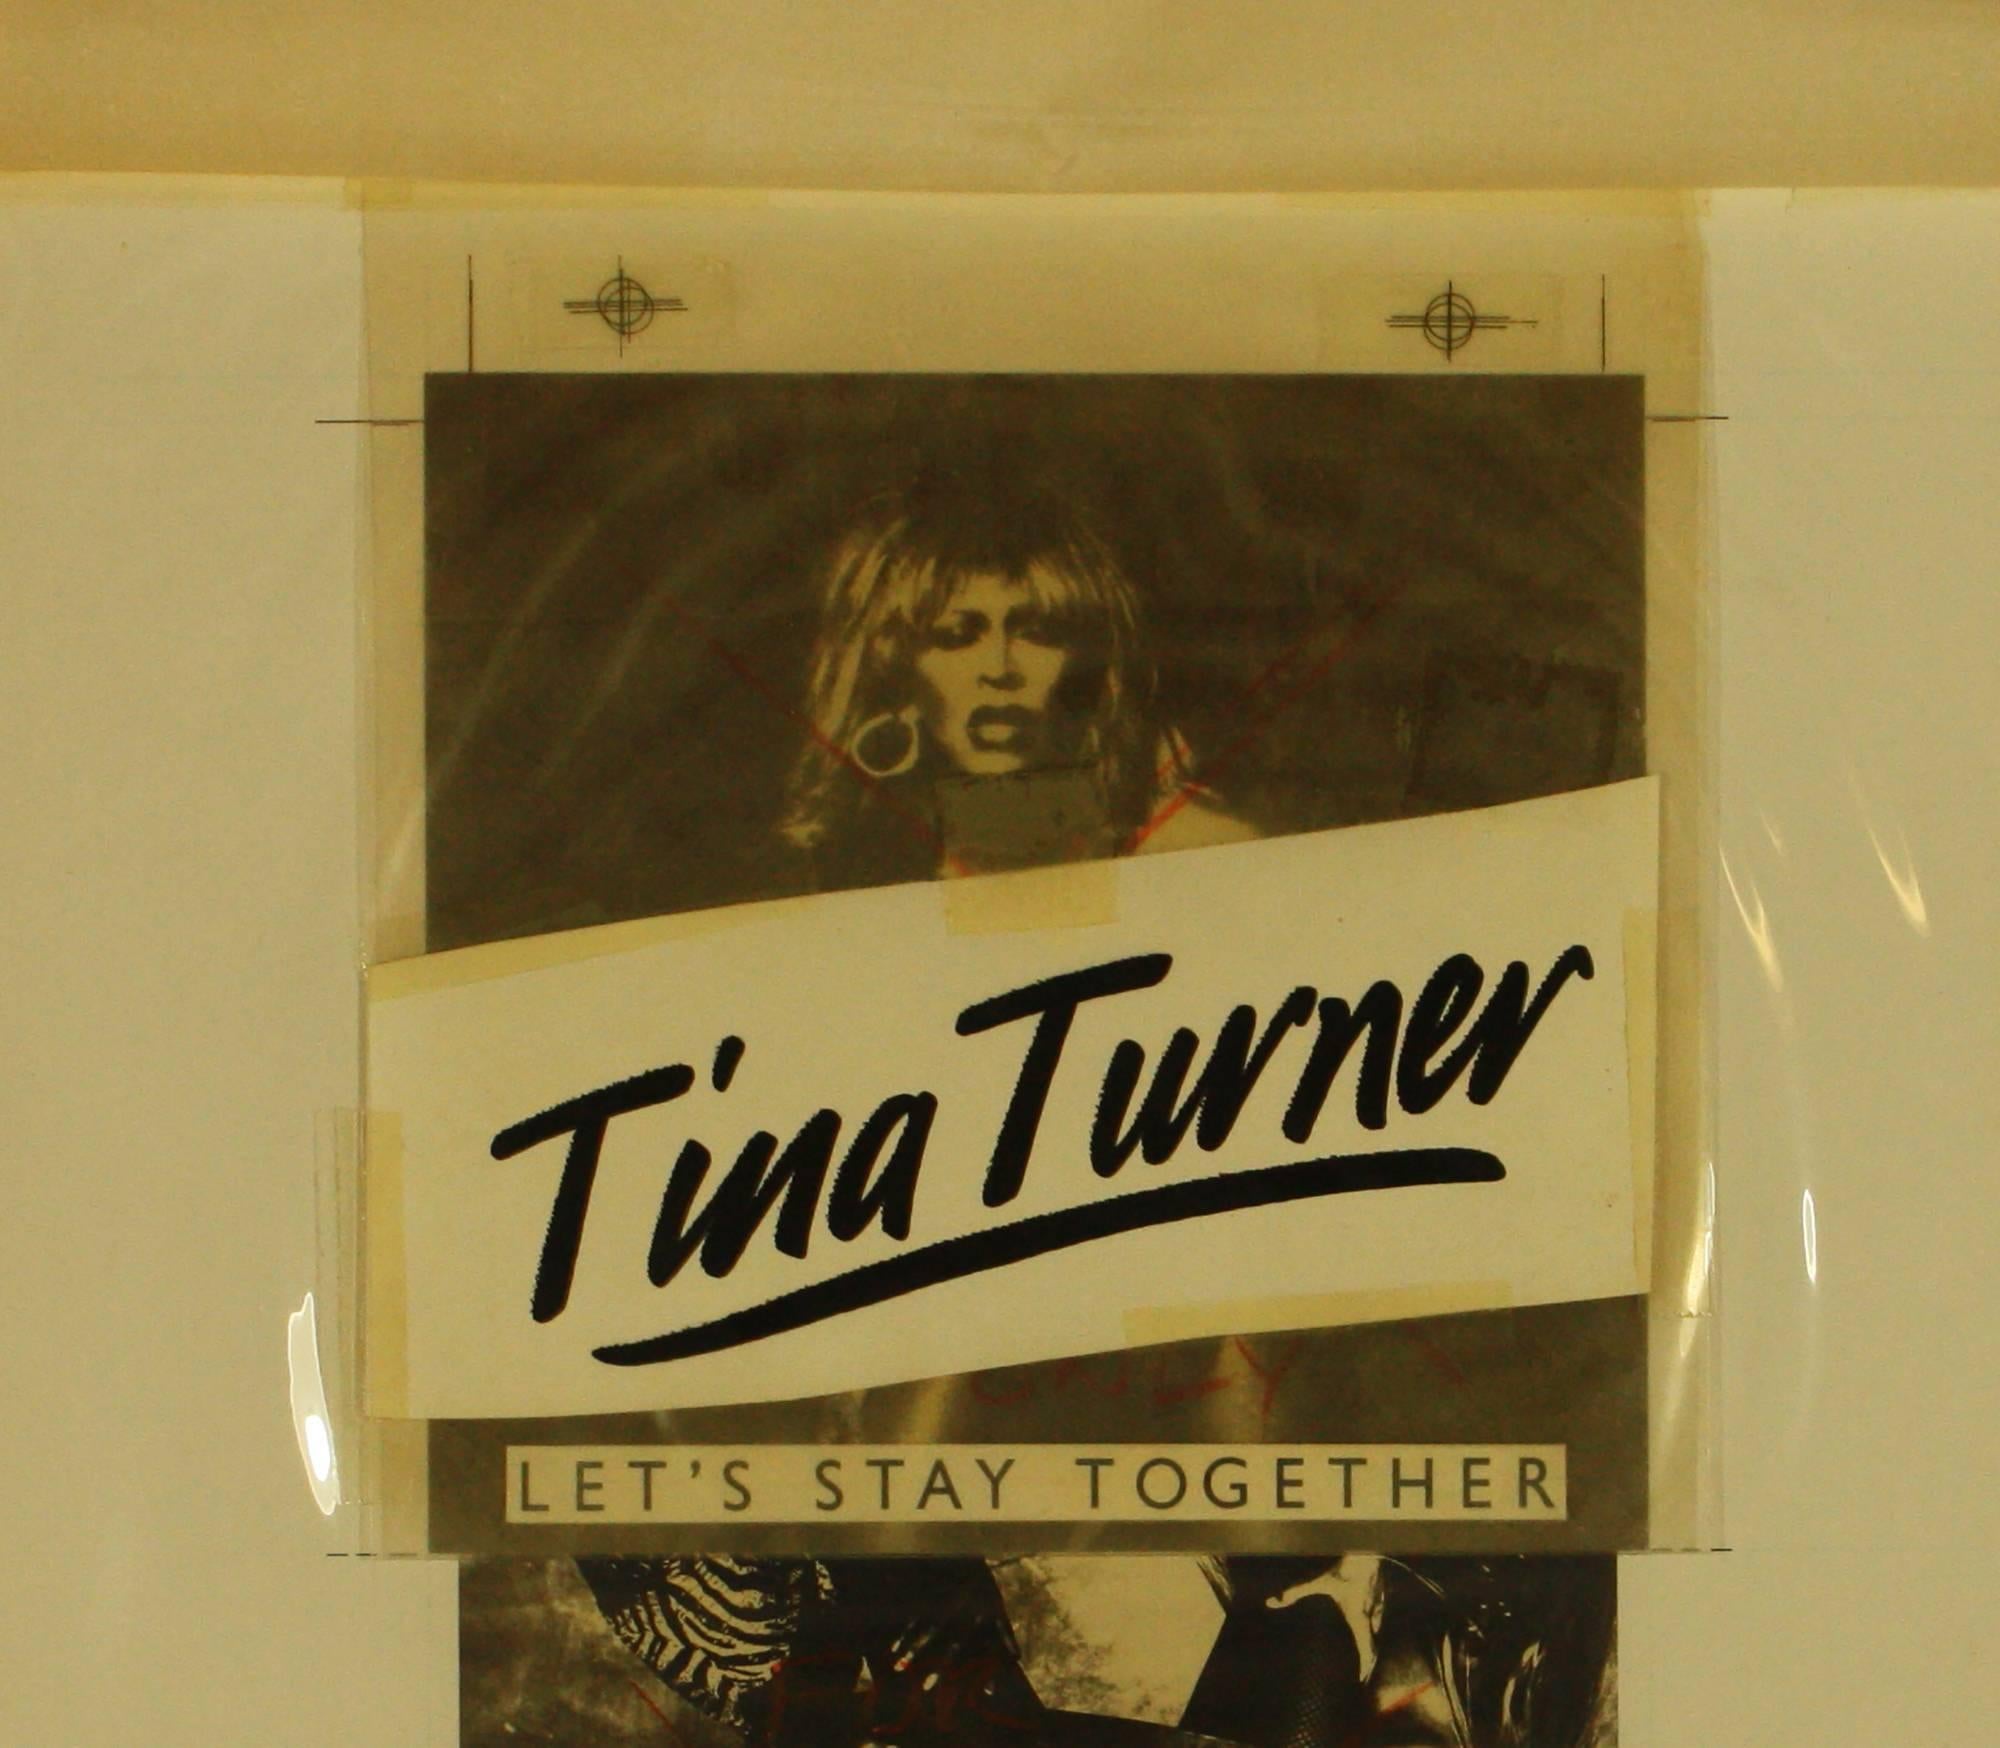                                                                TINA TURNER
                                                A PIECE OF MUSIC HISTORY 
        The Extremely rare UNRELEASED, ORIGINAL PRODUCTION ARTWORK  for 
                           